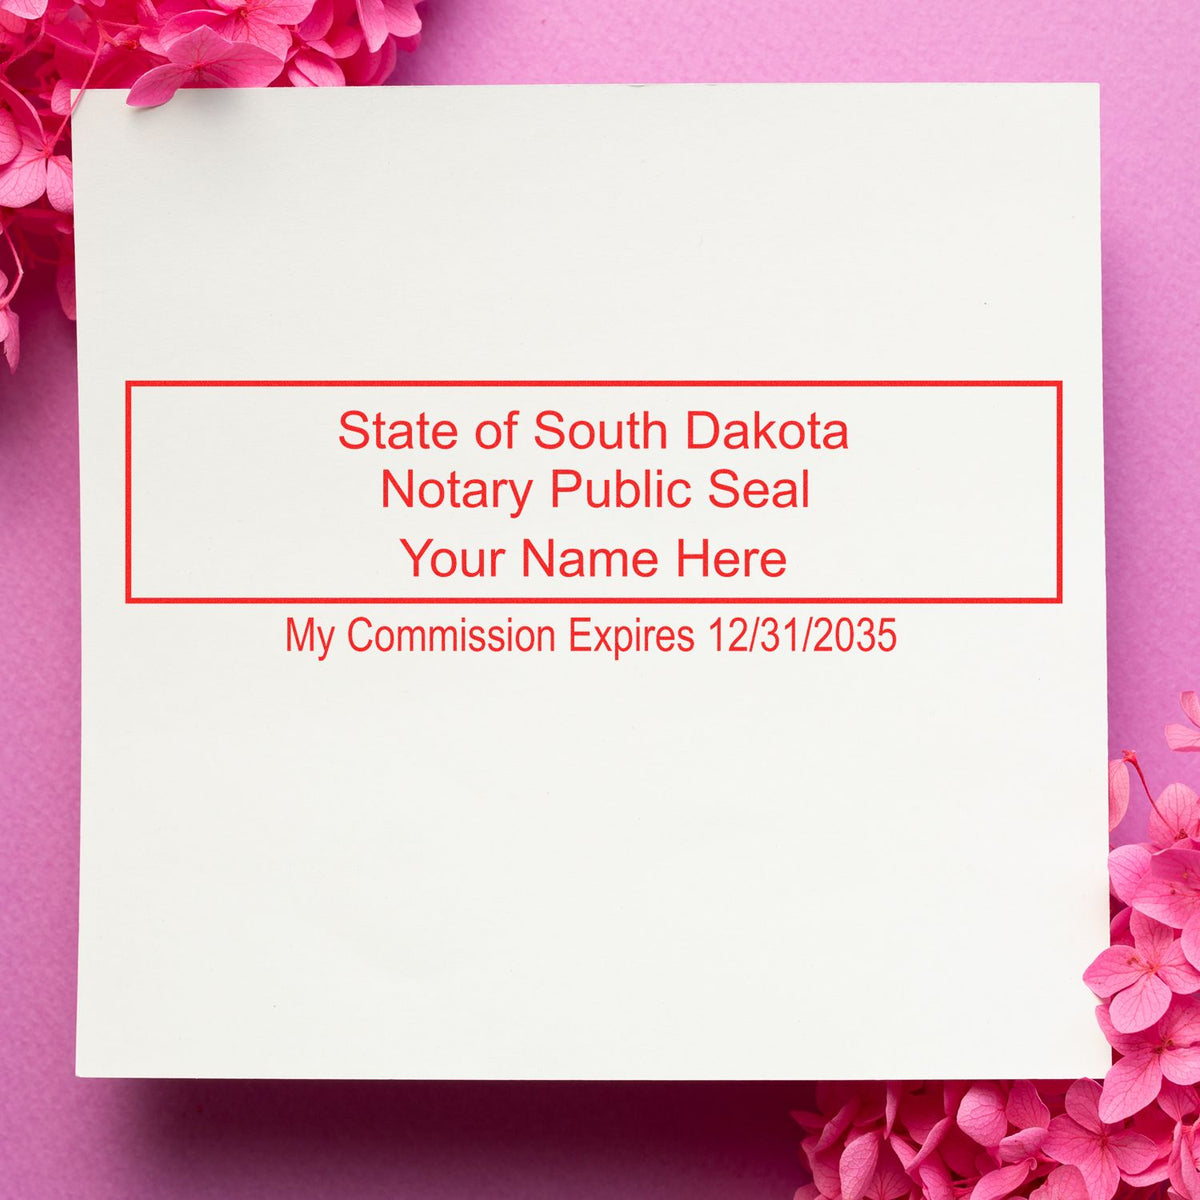 The Self-Inking Rectangular South Dakota Notary Stamp stamp impression comes to life with a crisp, detailed photo on paper - showcasing true professional quality.